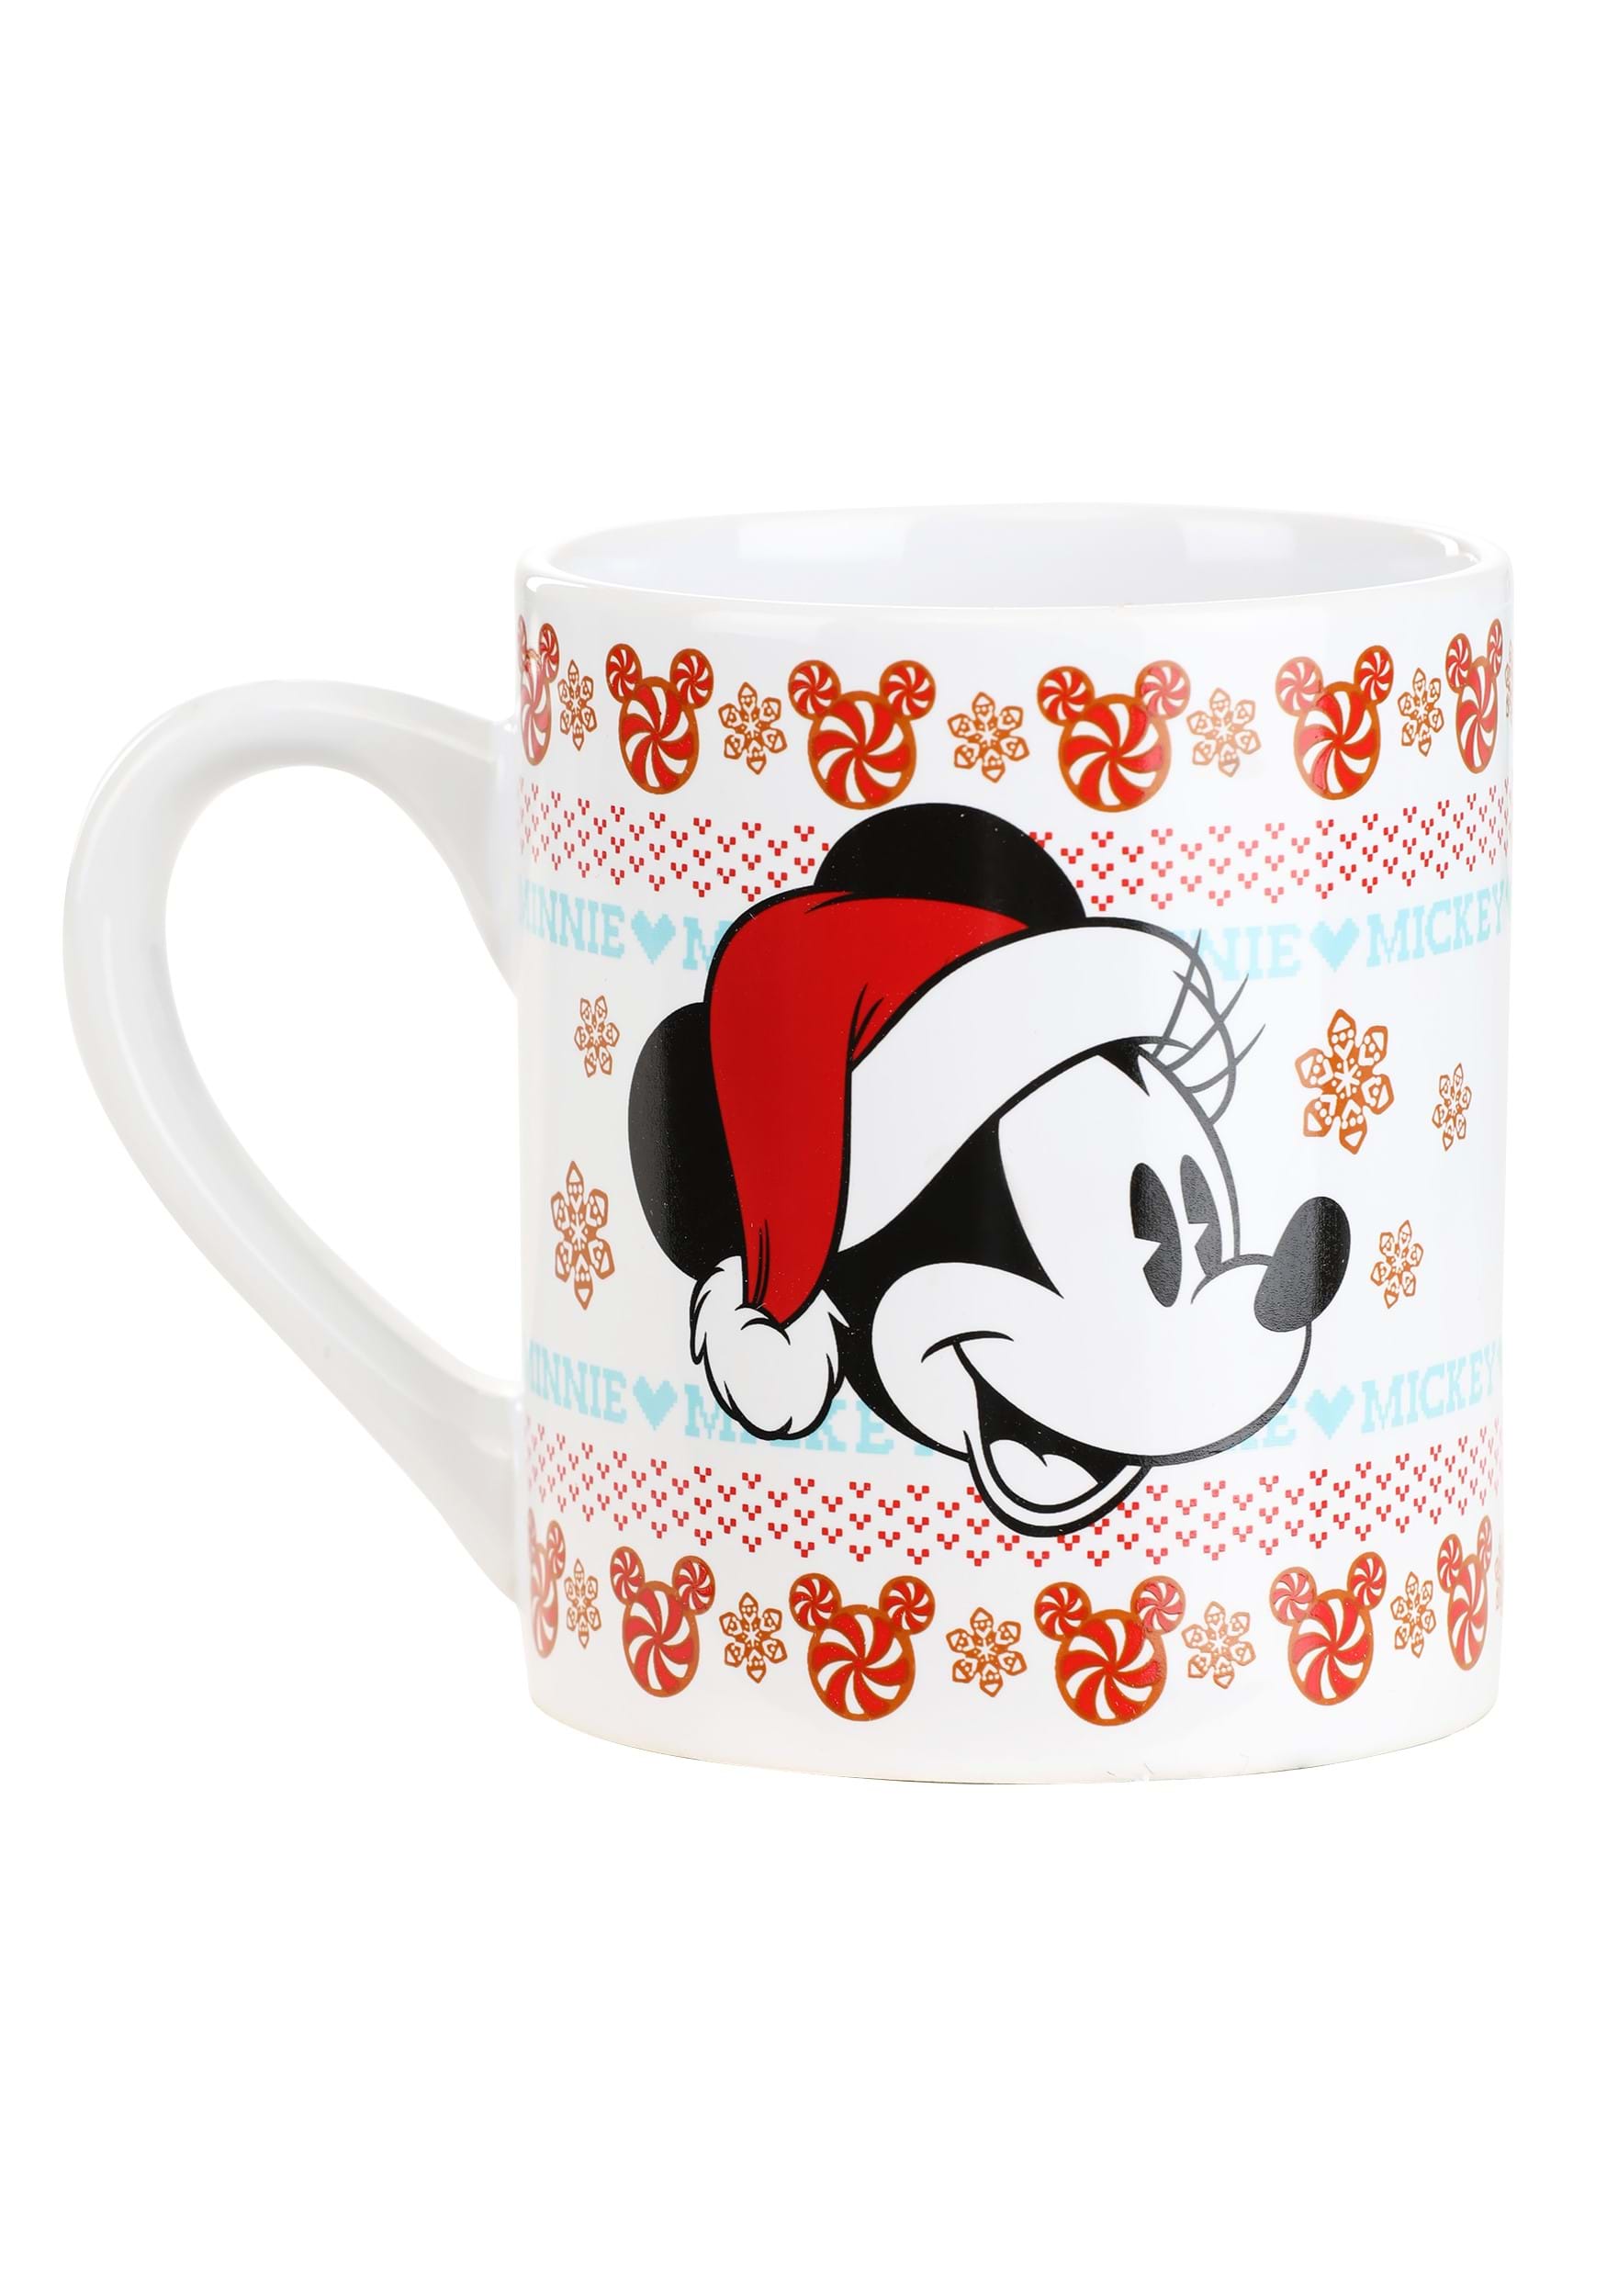 Forever 21 Women's Disney Mickey Mouse Ceramic Mug in White | Holiday / Christmas Clothing + Accessories | F21